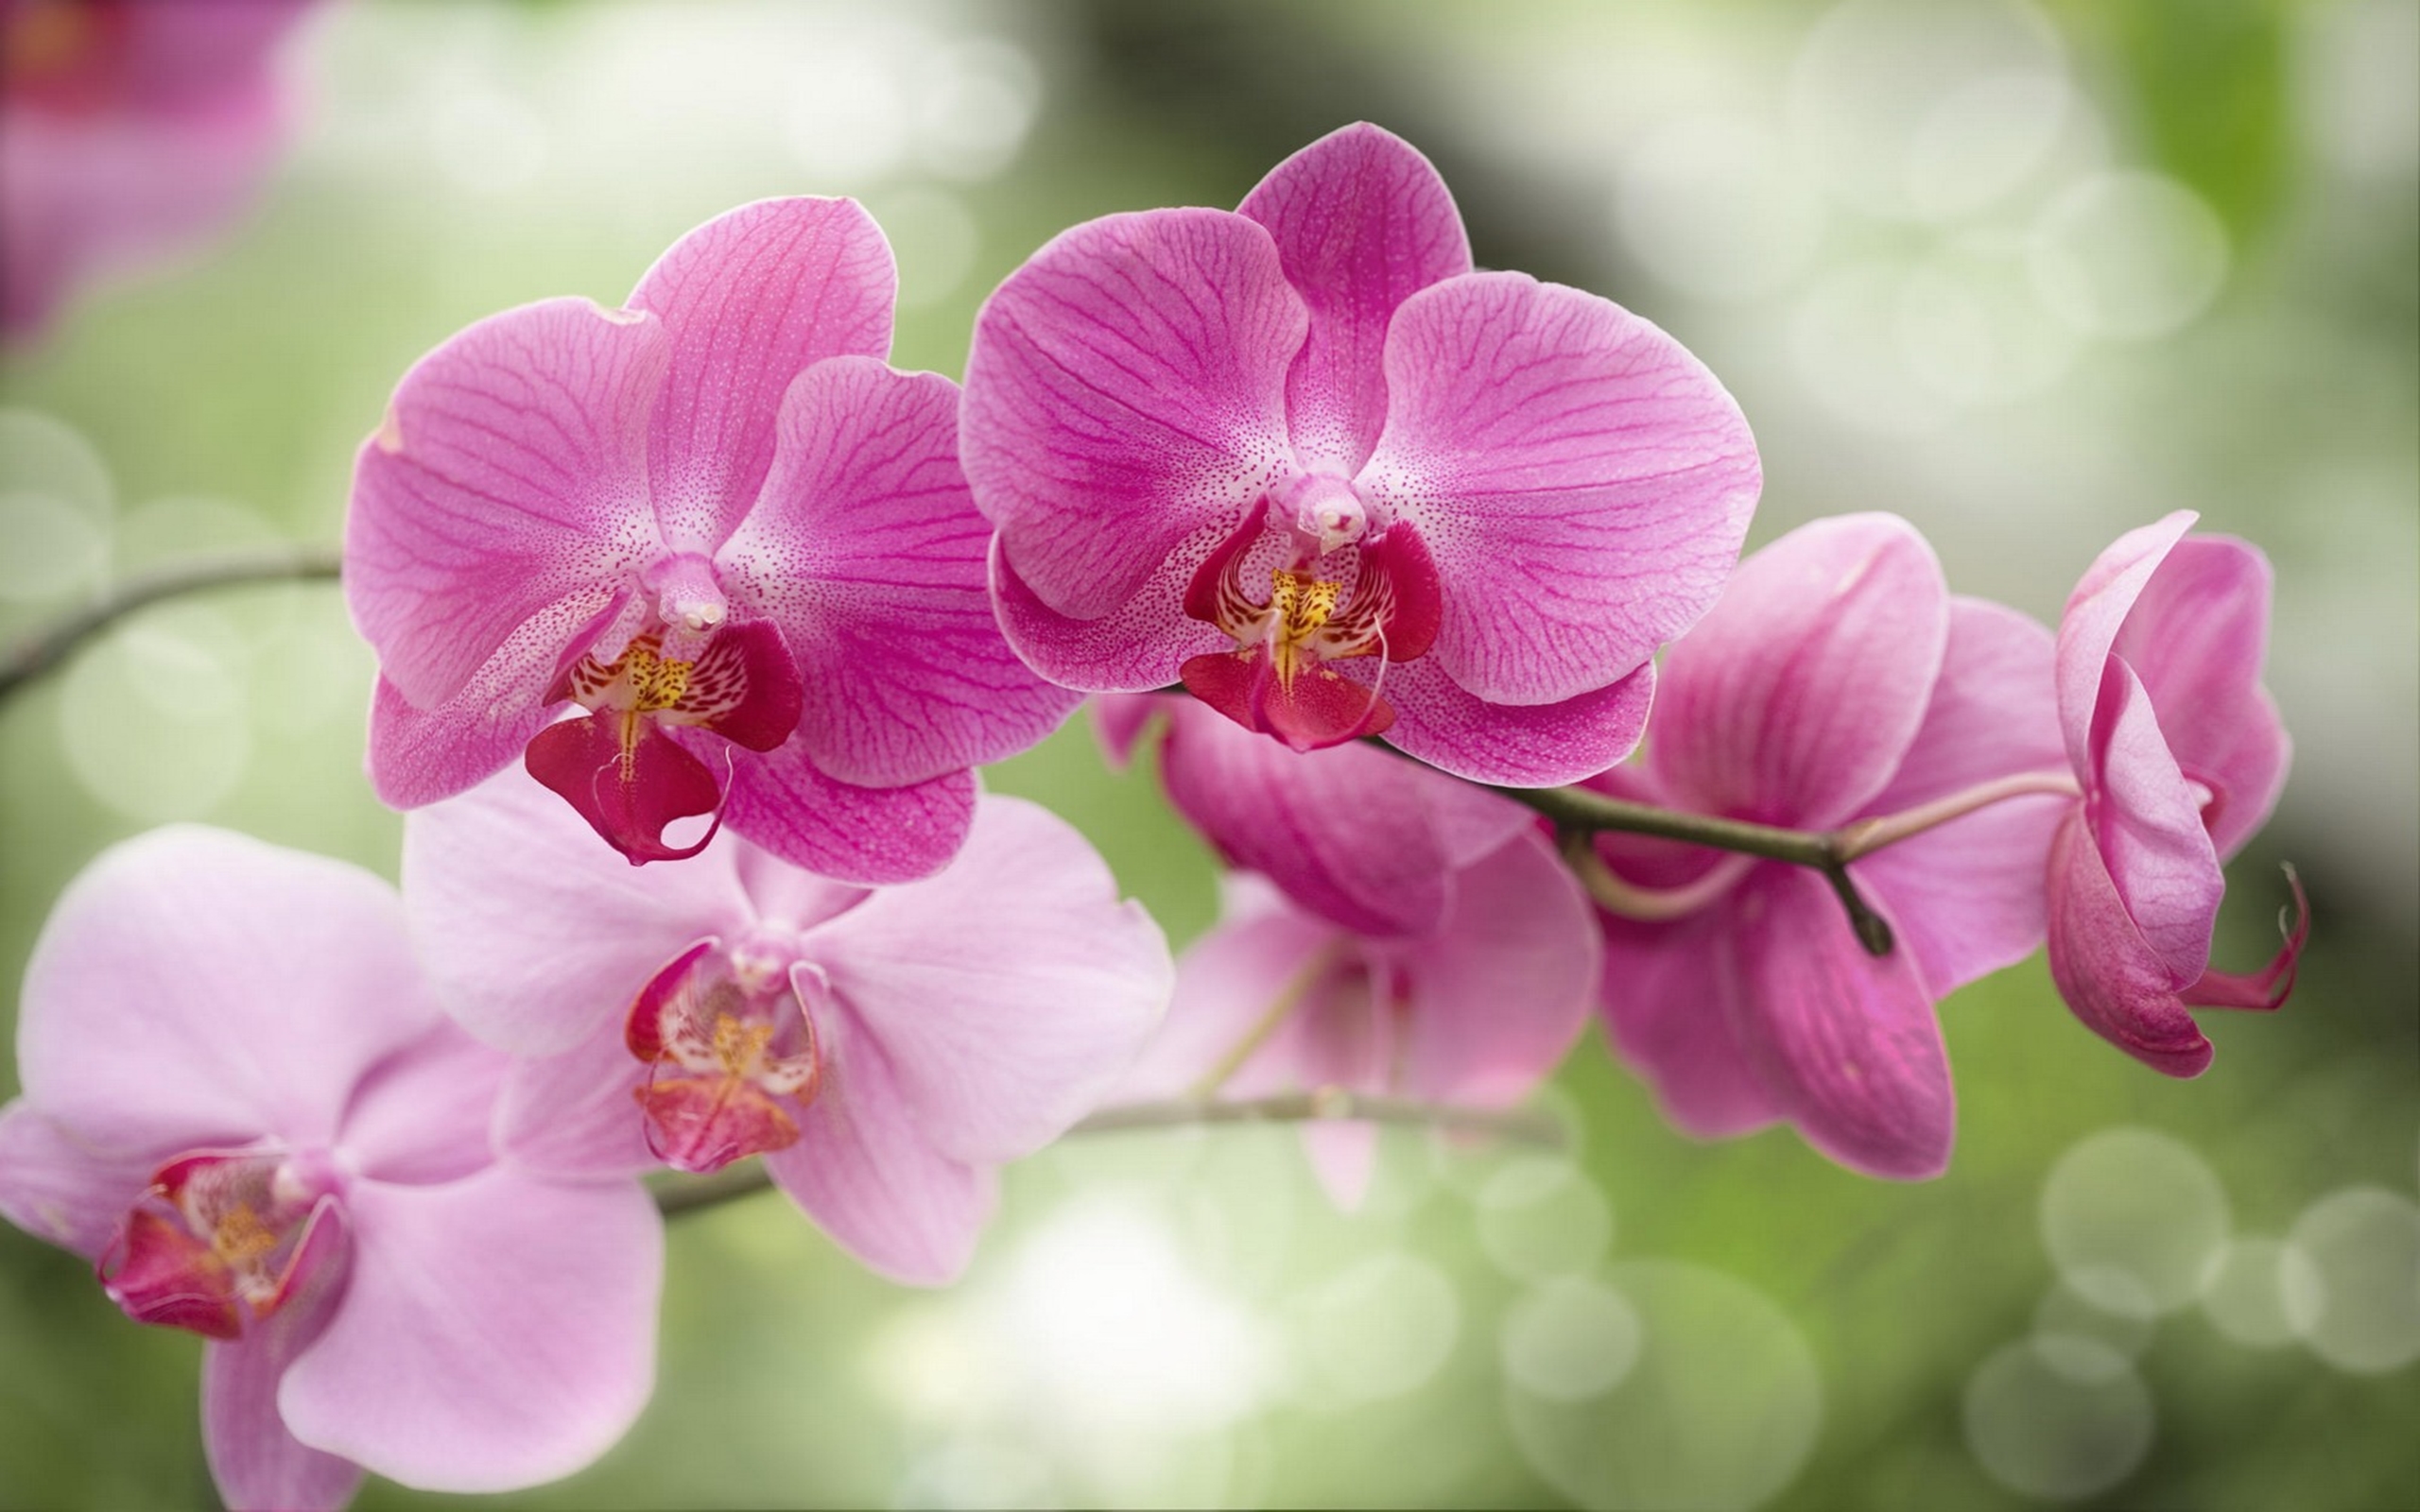 Beautiful Pink Flowers Orchid Hd Wallpaper : Wallpapers13.com